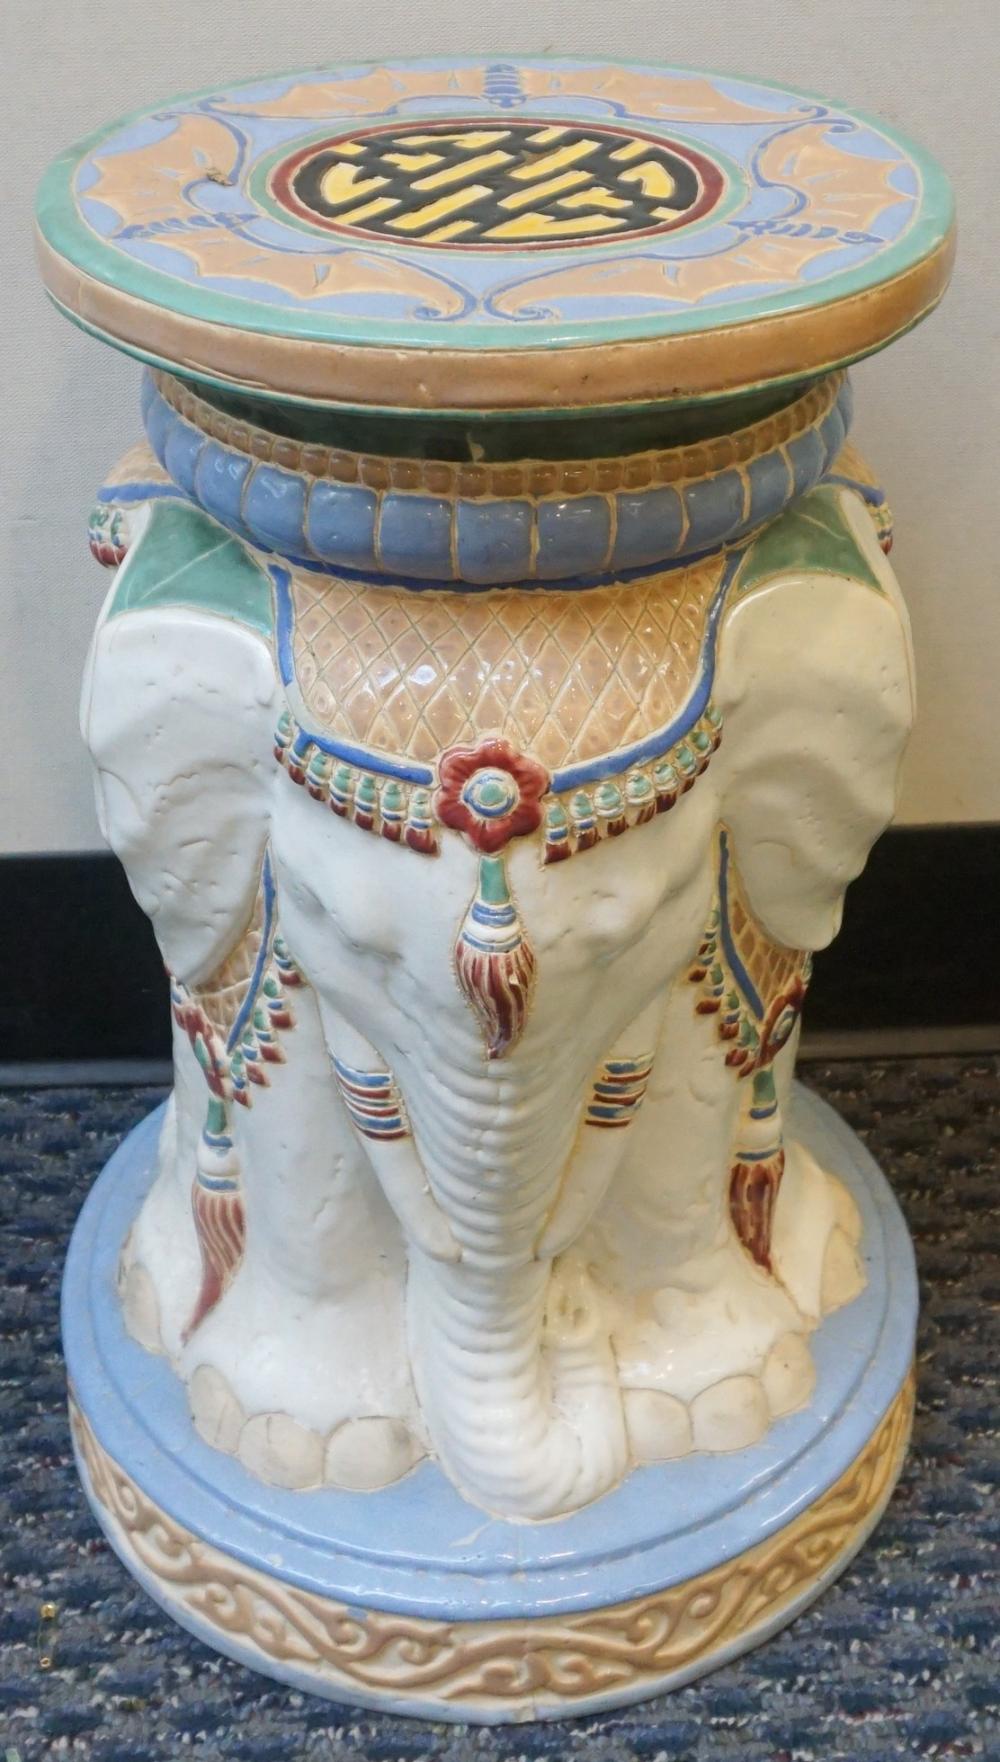 SOUTHEAST ASIAN POLYCHROME DECORATED